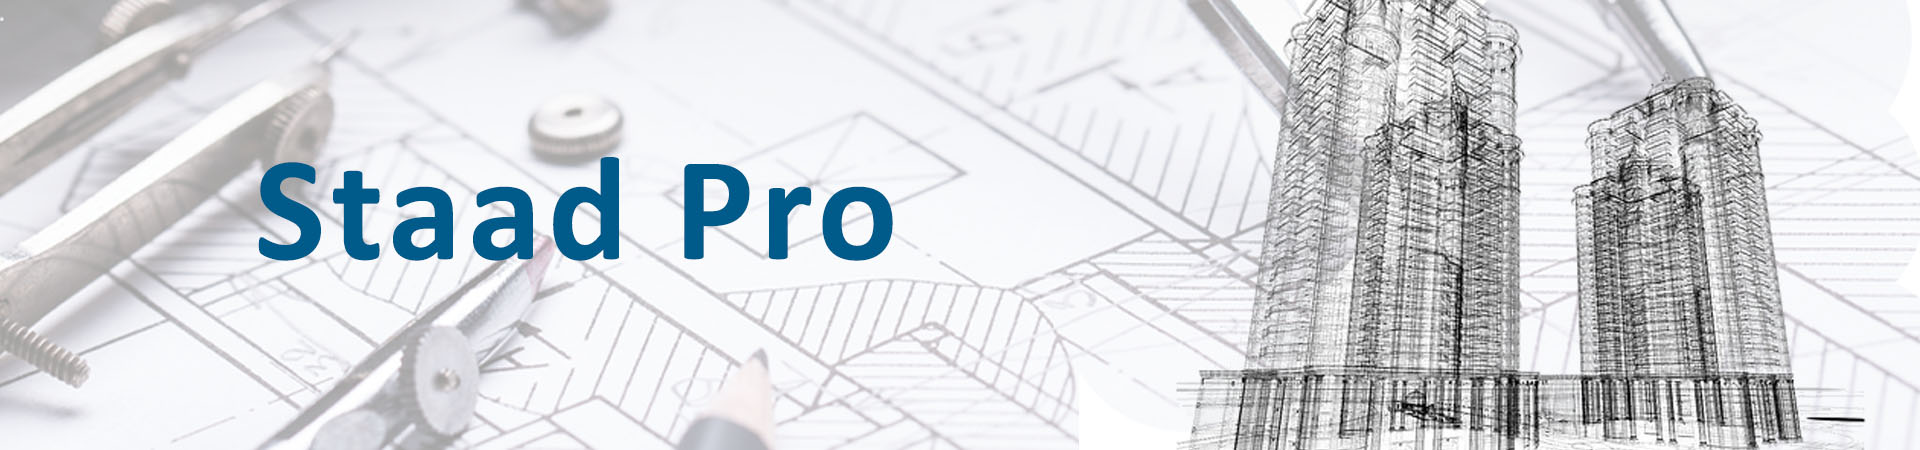 STAAD  Pro Course Training In Vadodara | STAAD Pro Course  Training institute In Vadodara | STAAD Pro Course  Class In Vadodara | STAAD Pro Course represents Structural Analysis and Design